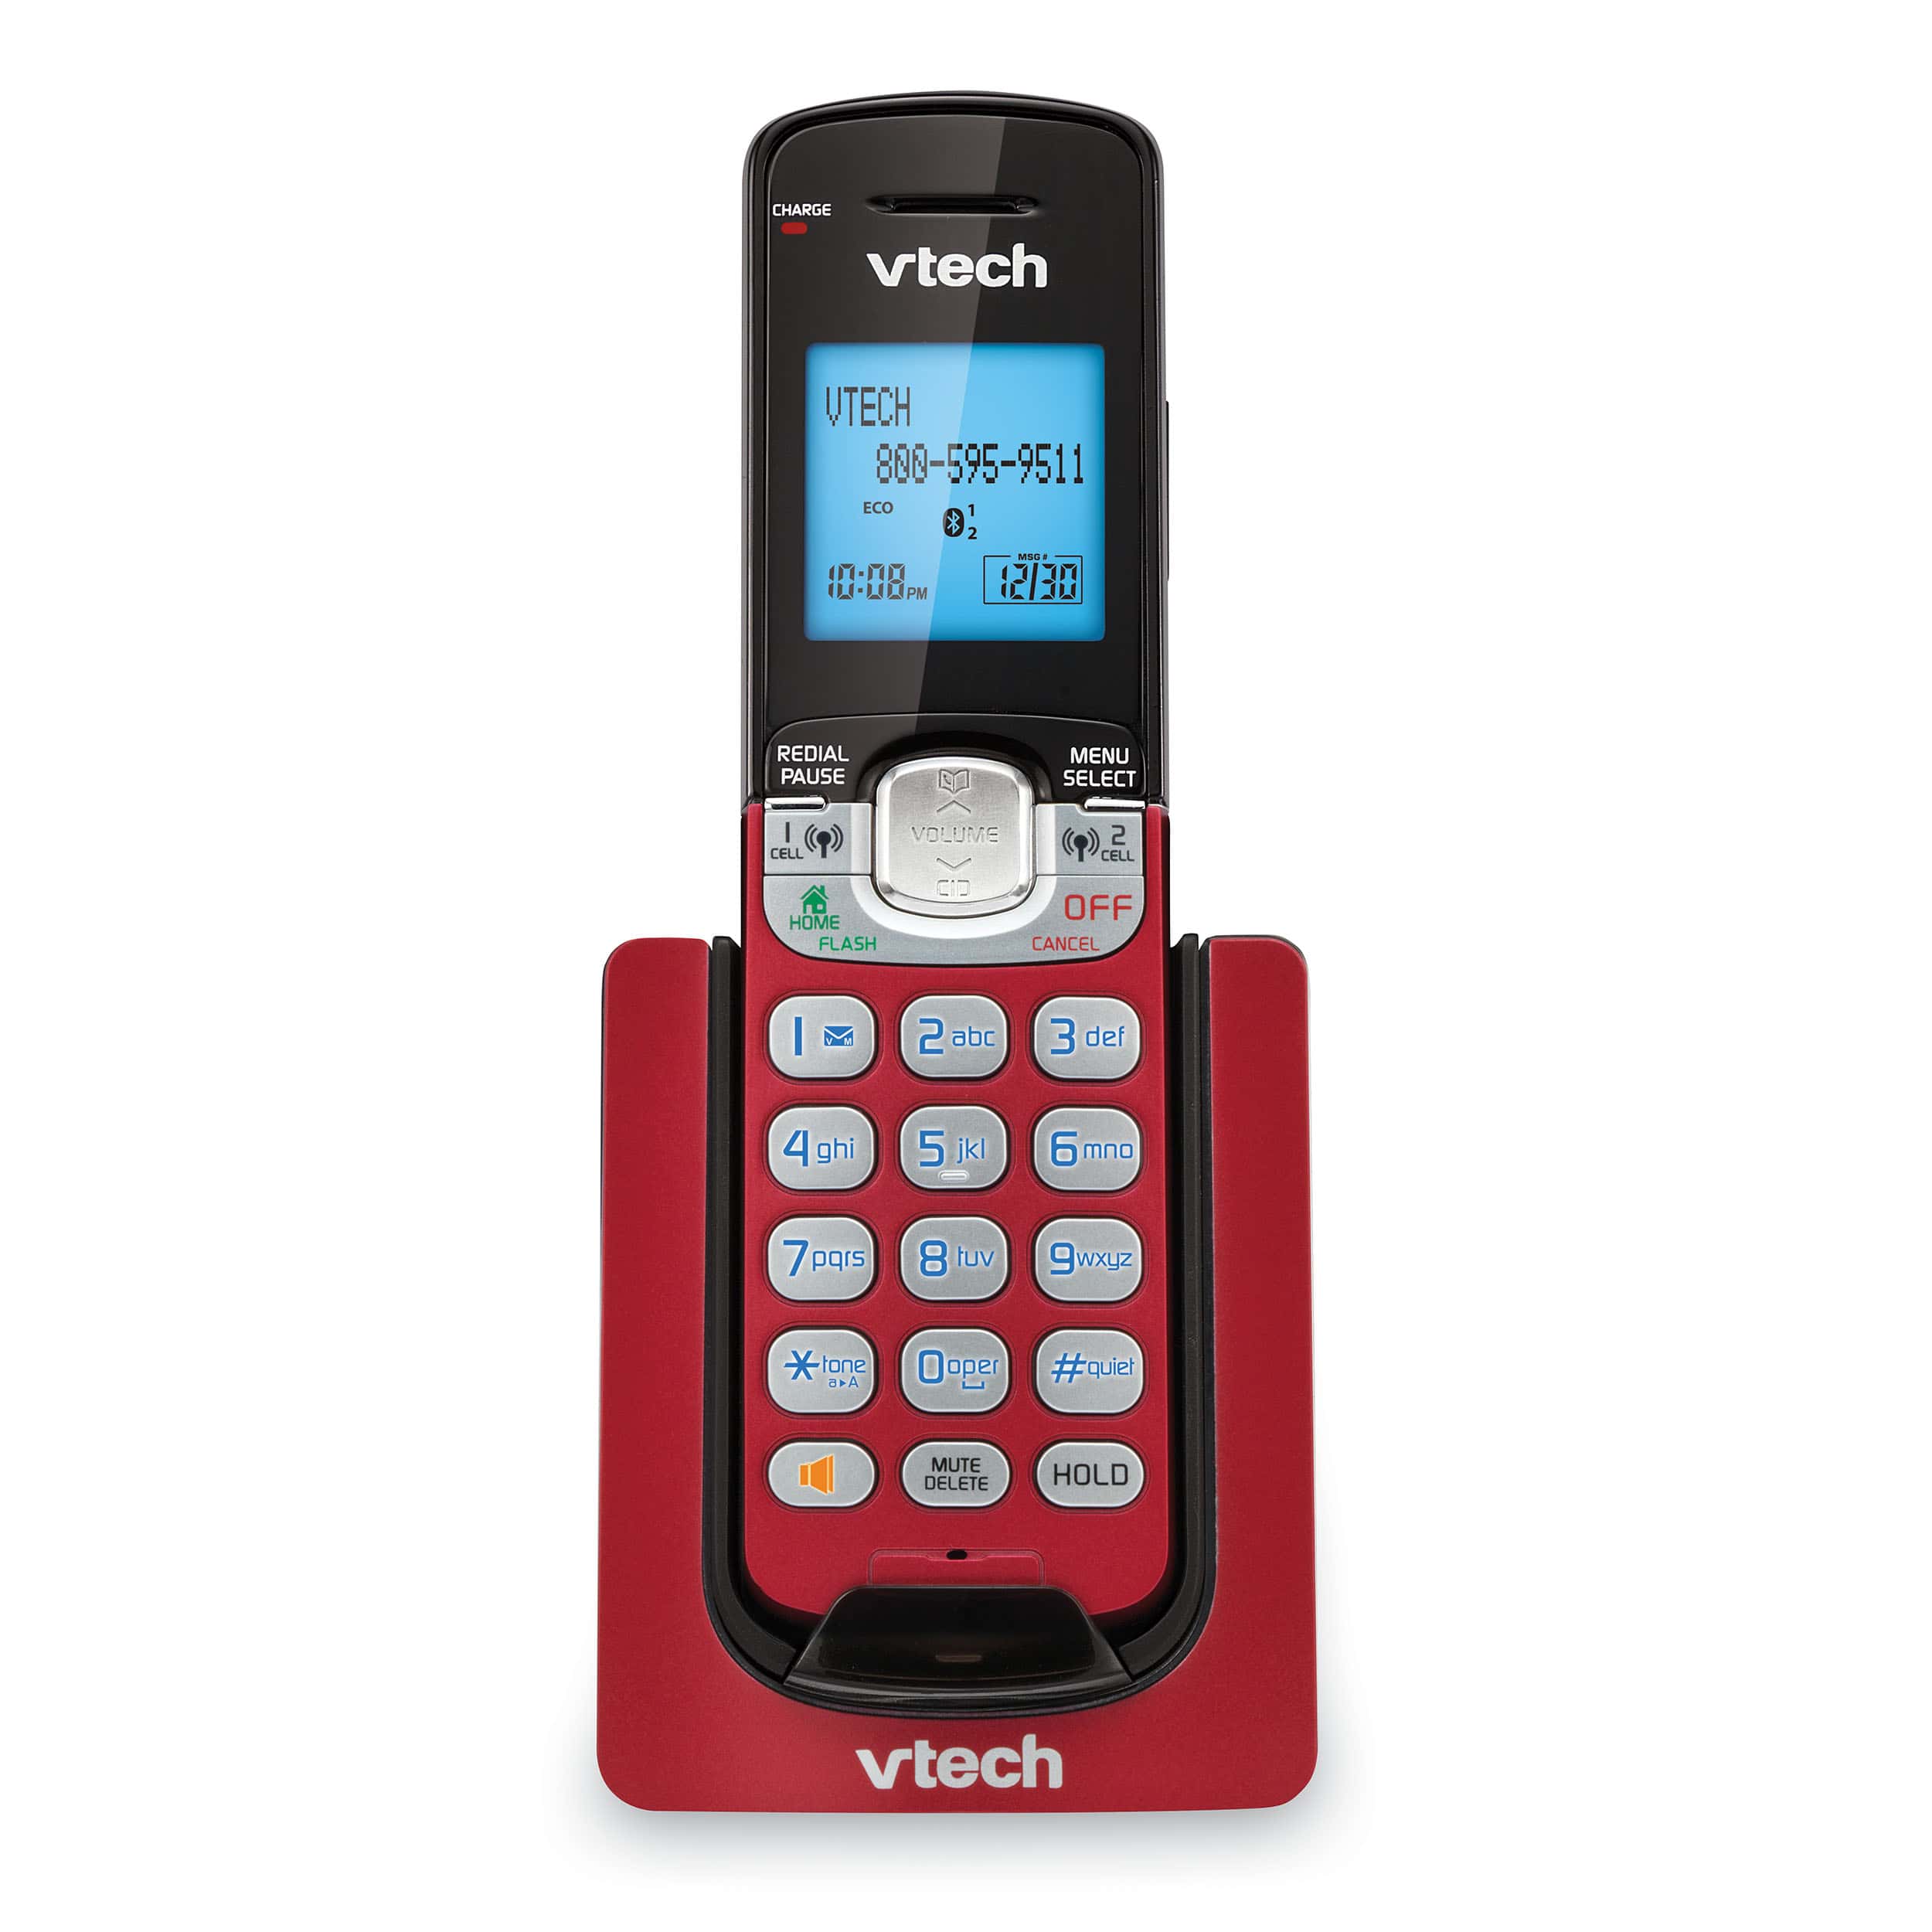 VTech CS6509-16 Accessory Cordless Handset CS6528 Red Requires a VTech CS6519 or CS6529 Series Cordless Phone System to Operate 